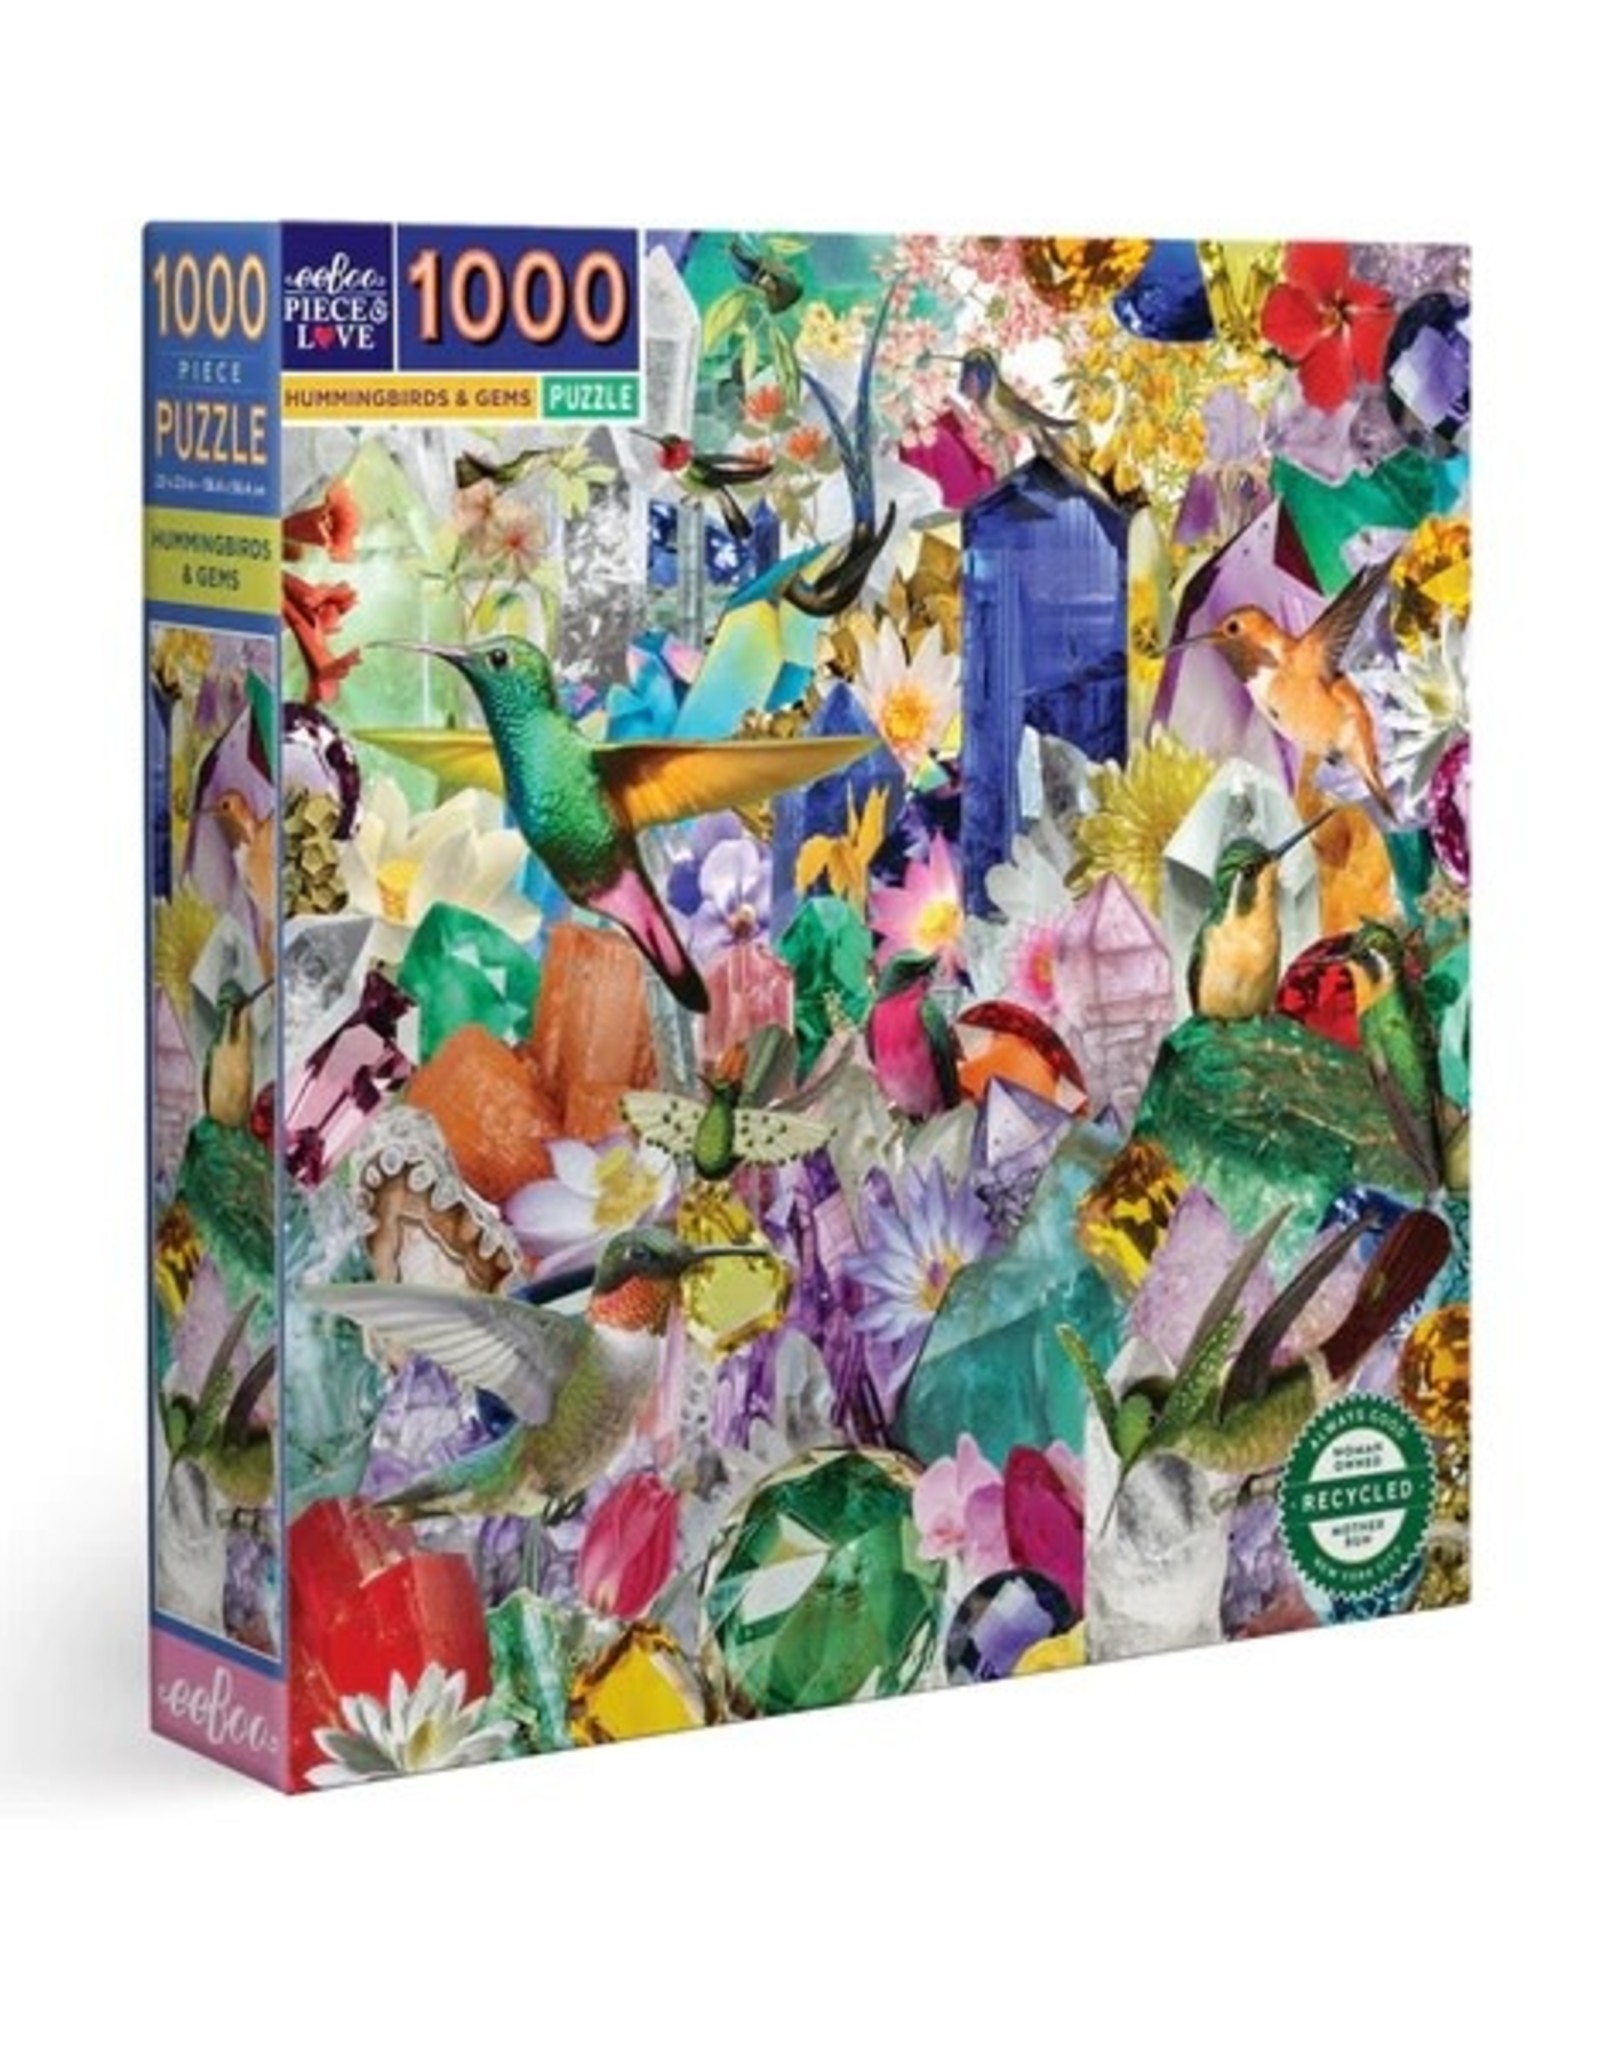 eeBoo HUMMINGBIRDS AND GEMS 1000PC SQUARE PUZZLE